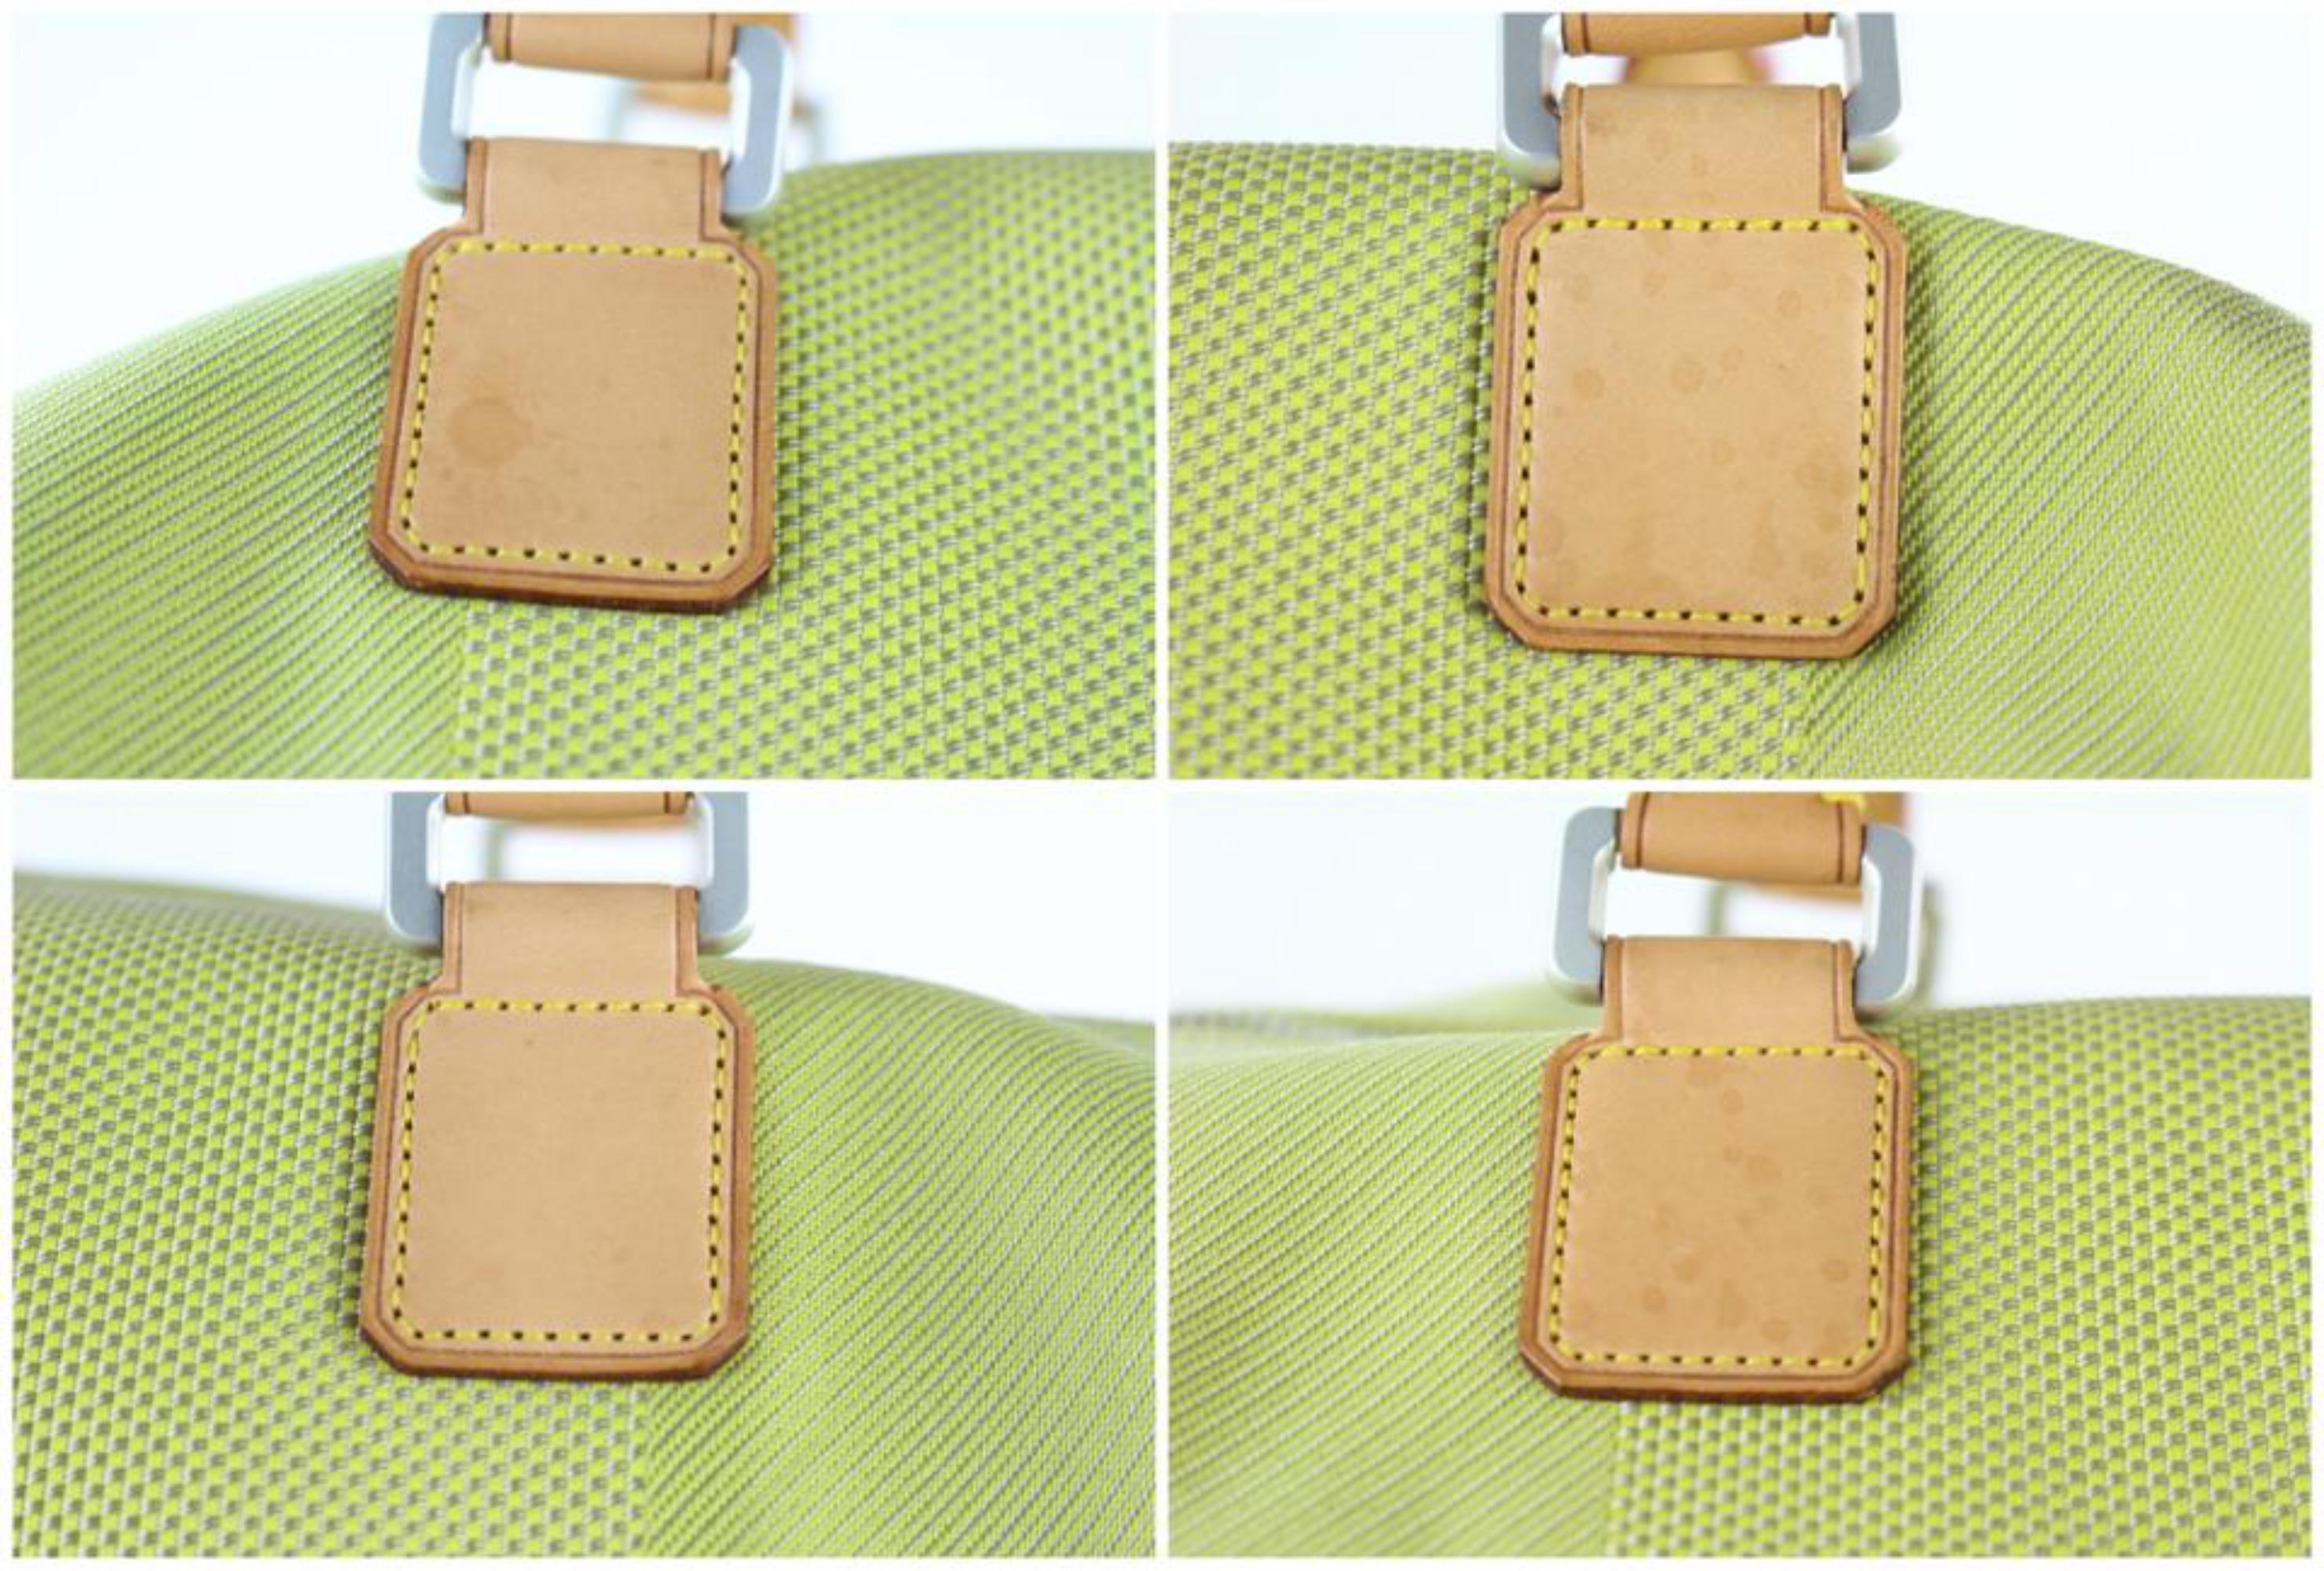 Louis Vuitton Jaune Lv Cup Cube 2way Convertible 3le0109 Green Canvas Tote For Sale 4